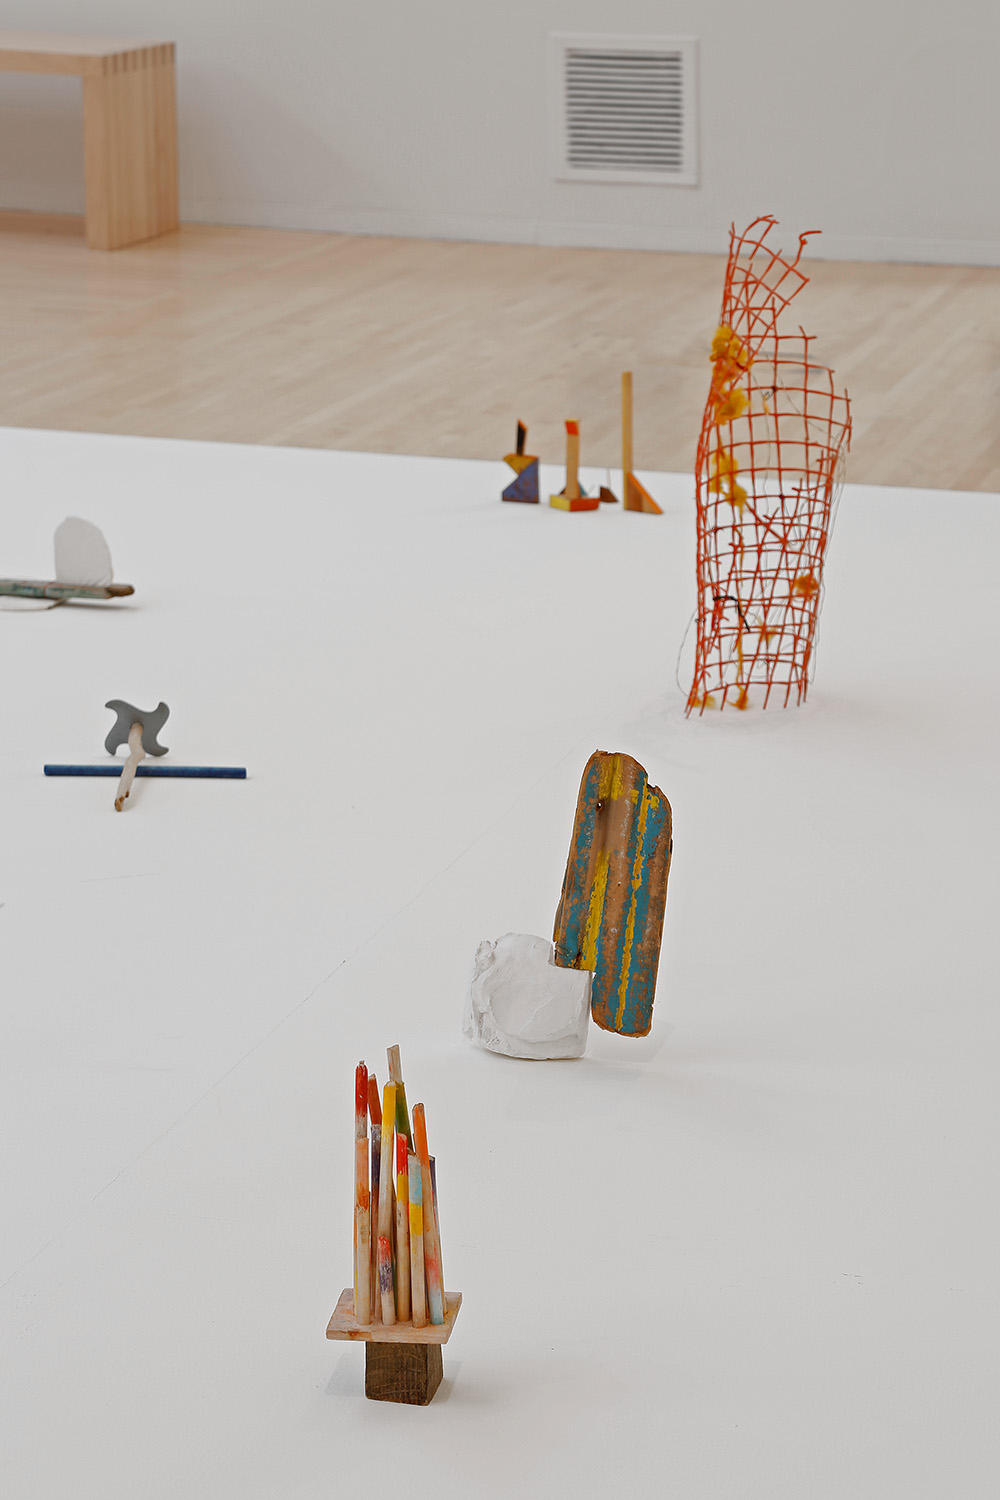 Multiple small sculptures are set on a painted, white floor